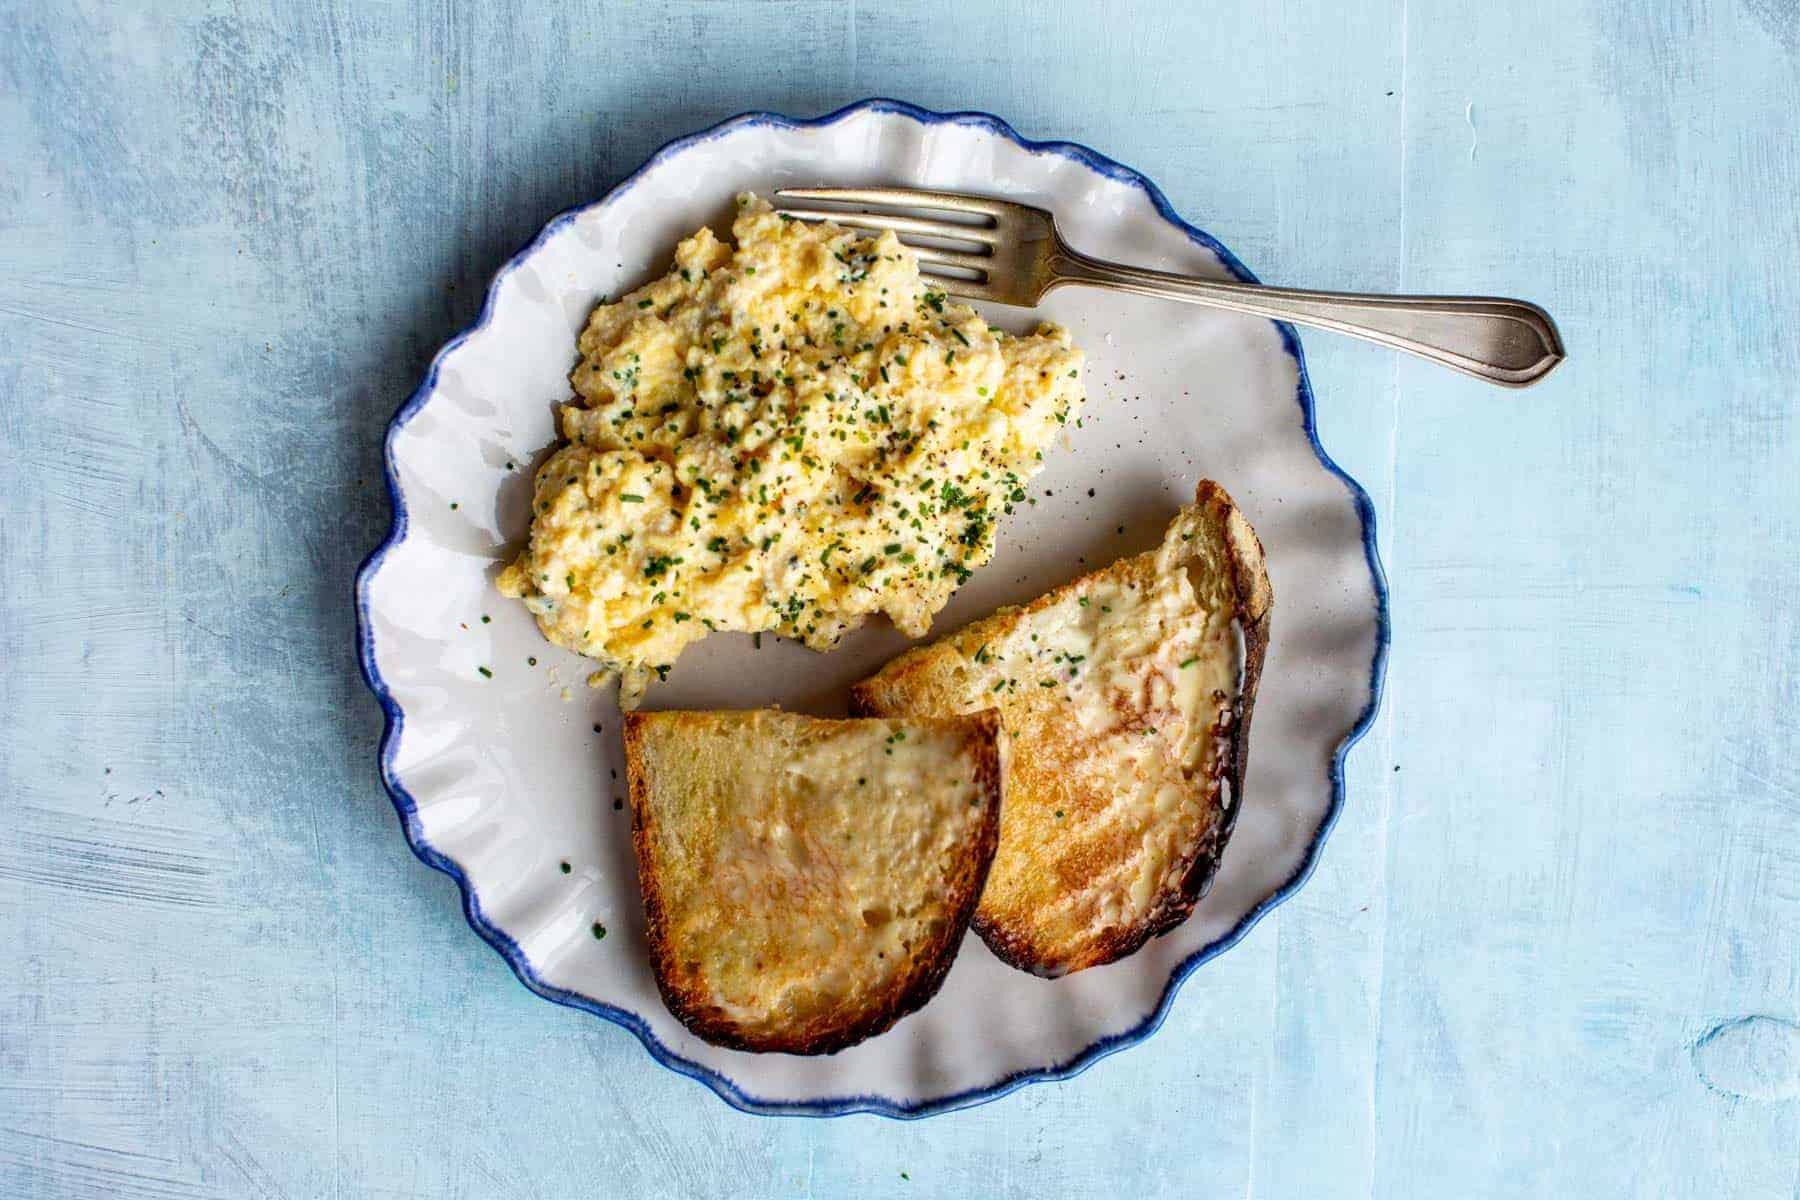 Soft scrambled egg with ricotta cheese.